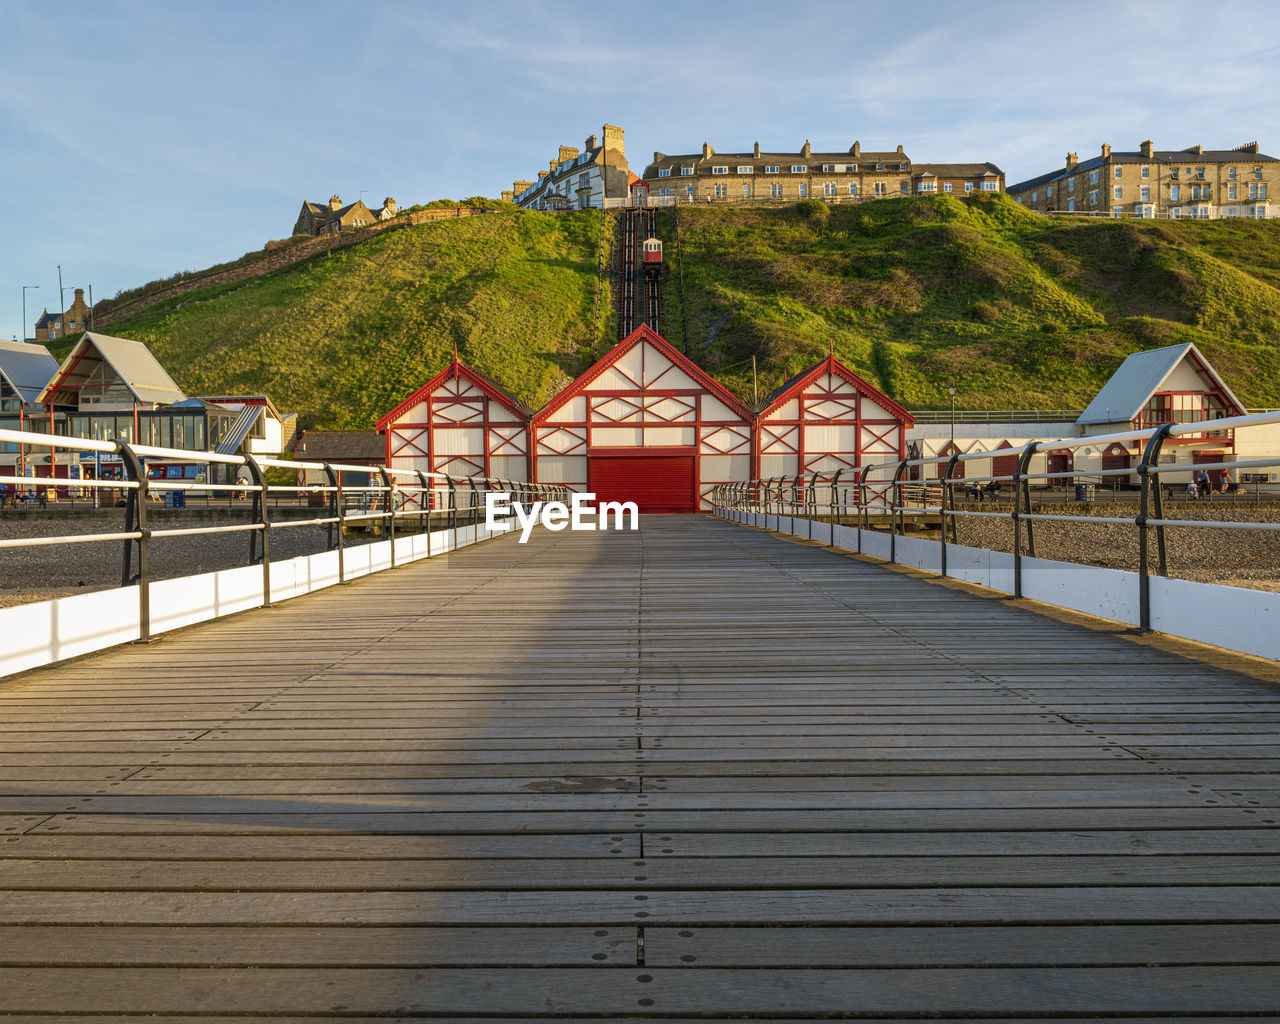 Saltburn by the sea pier looking towards the cliff lift which dates from 1884